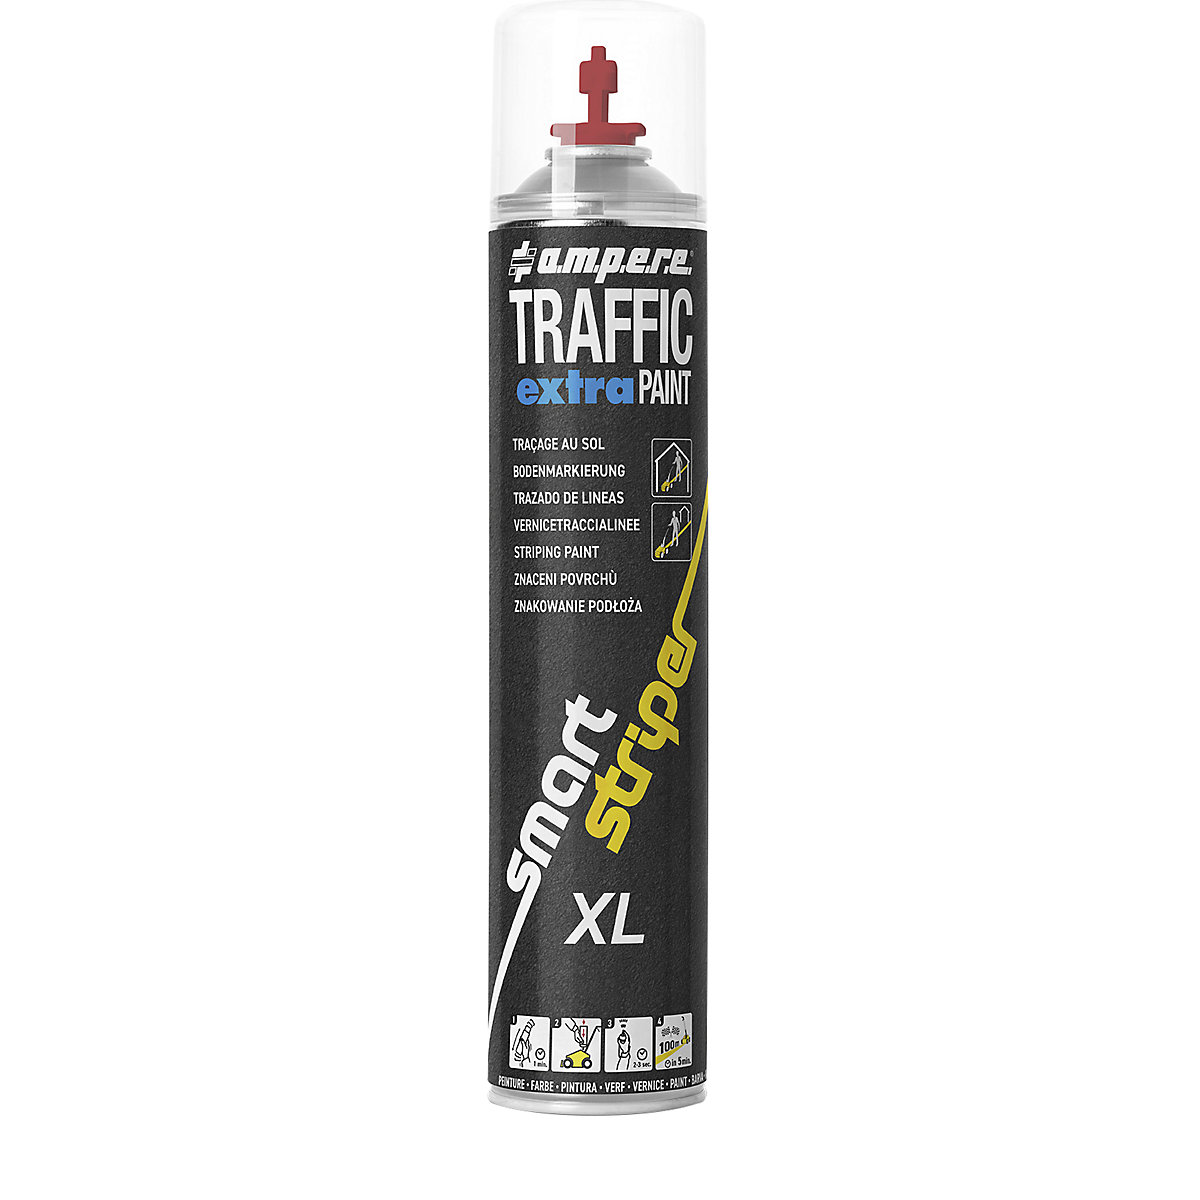 Traffic extra Paint® XL marking paint – Ampere, contents 750 ml, pack of 6, red-7